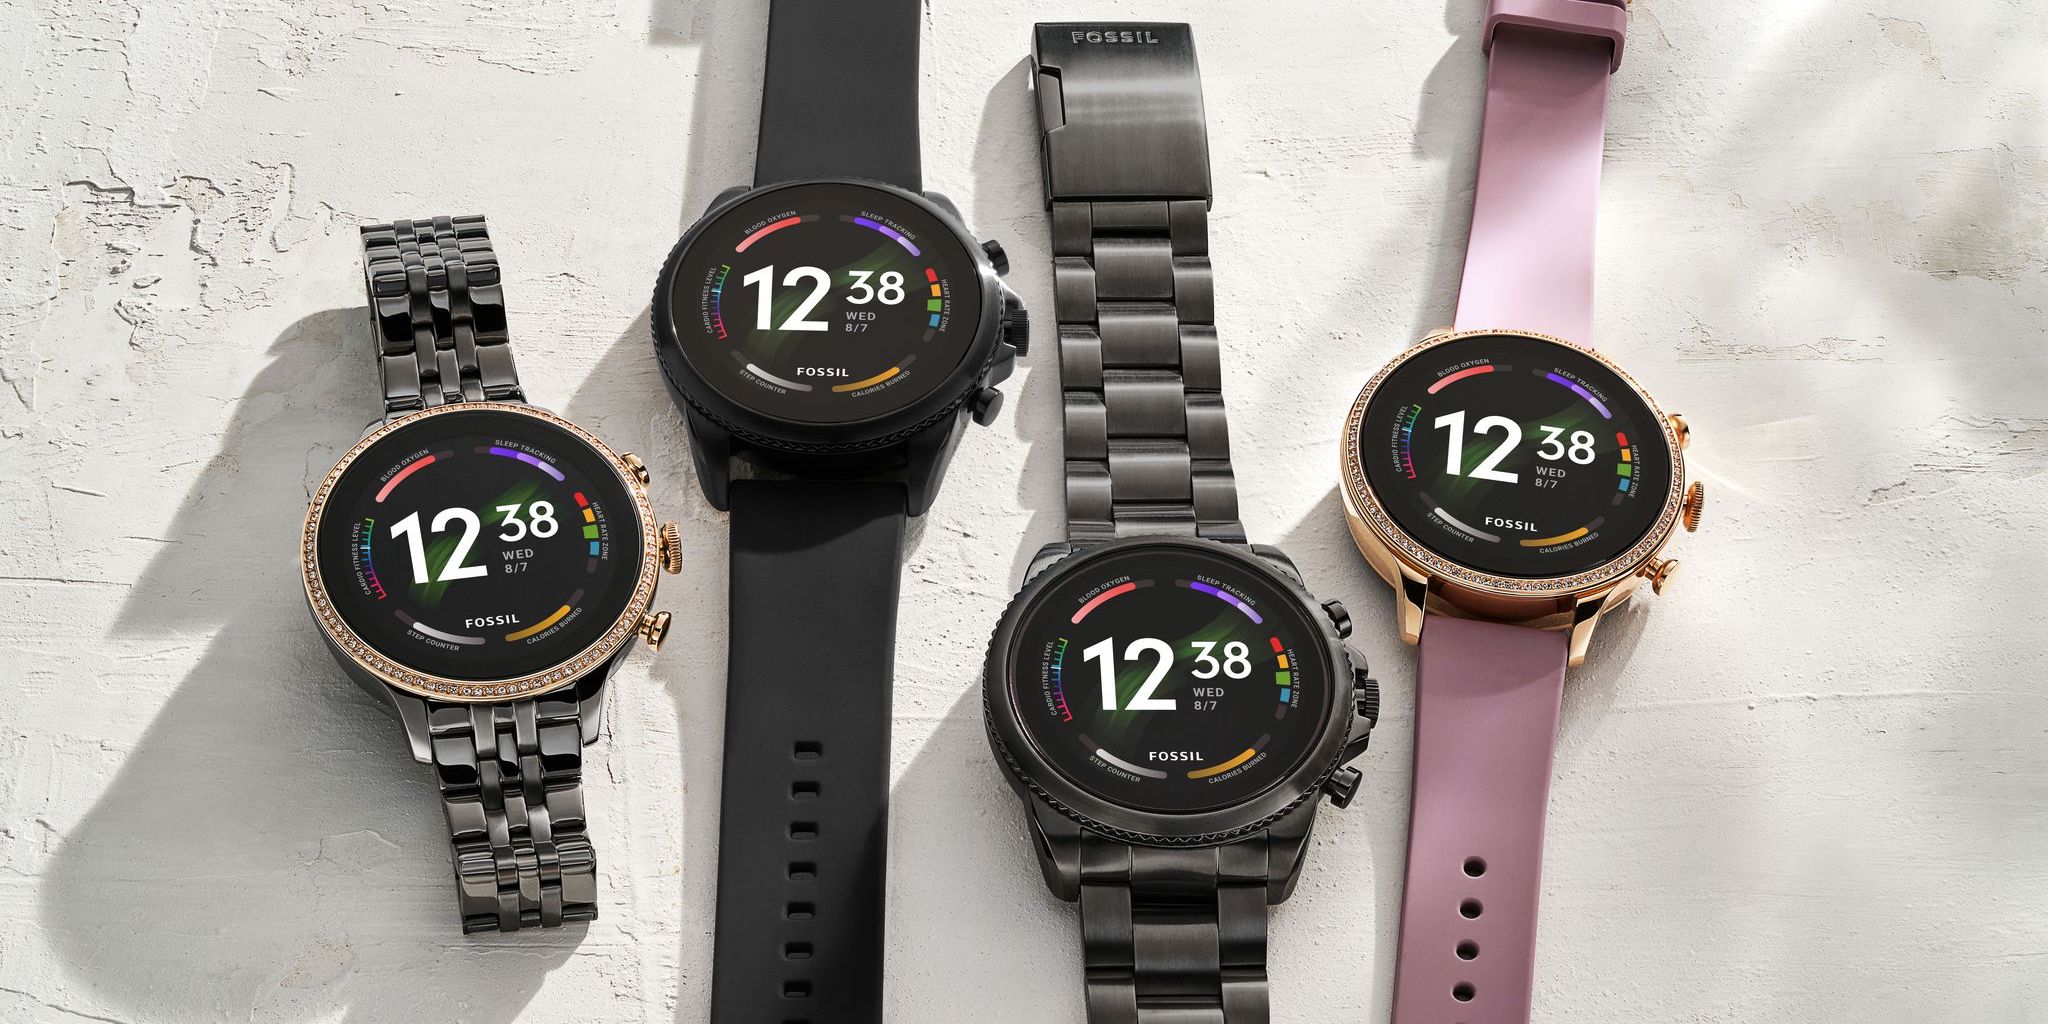 Fossil unveils Gen 6: 4100+, SpO2, and Wear OS 3 in 2022 - 9to5Google